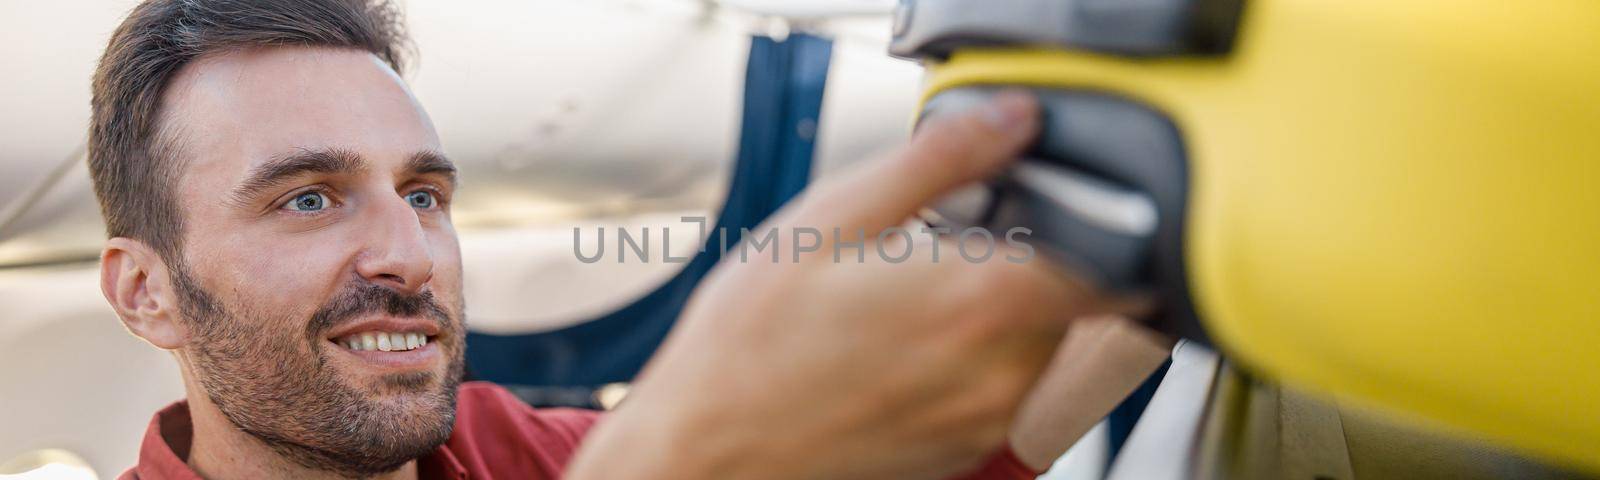 Portrait of cheerful man pulling out suitcase from hand luggage compartment, overhead locker while traveling by plane by Yaroslav_astakhov